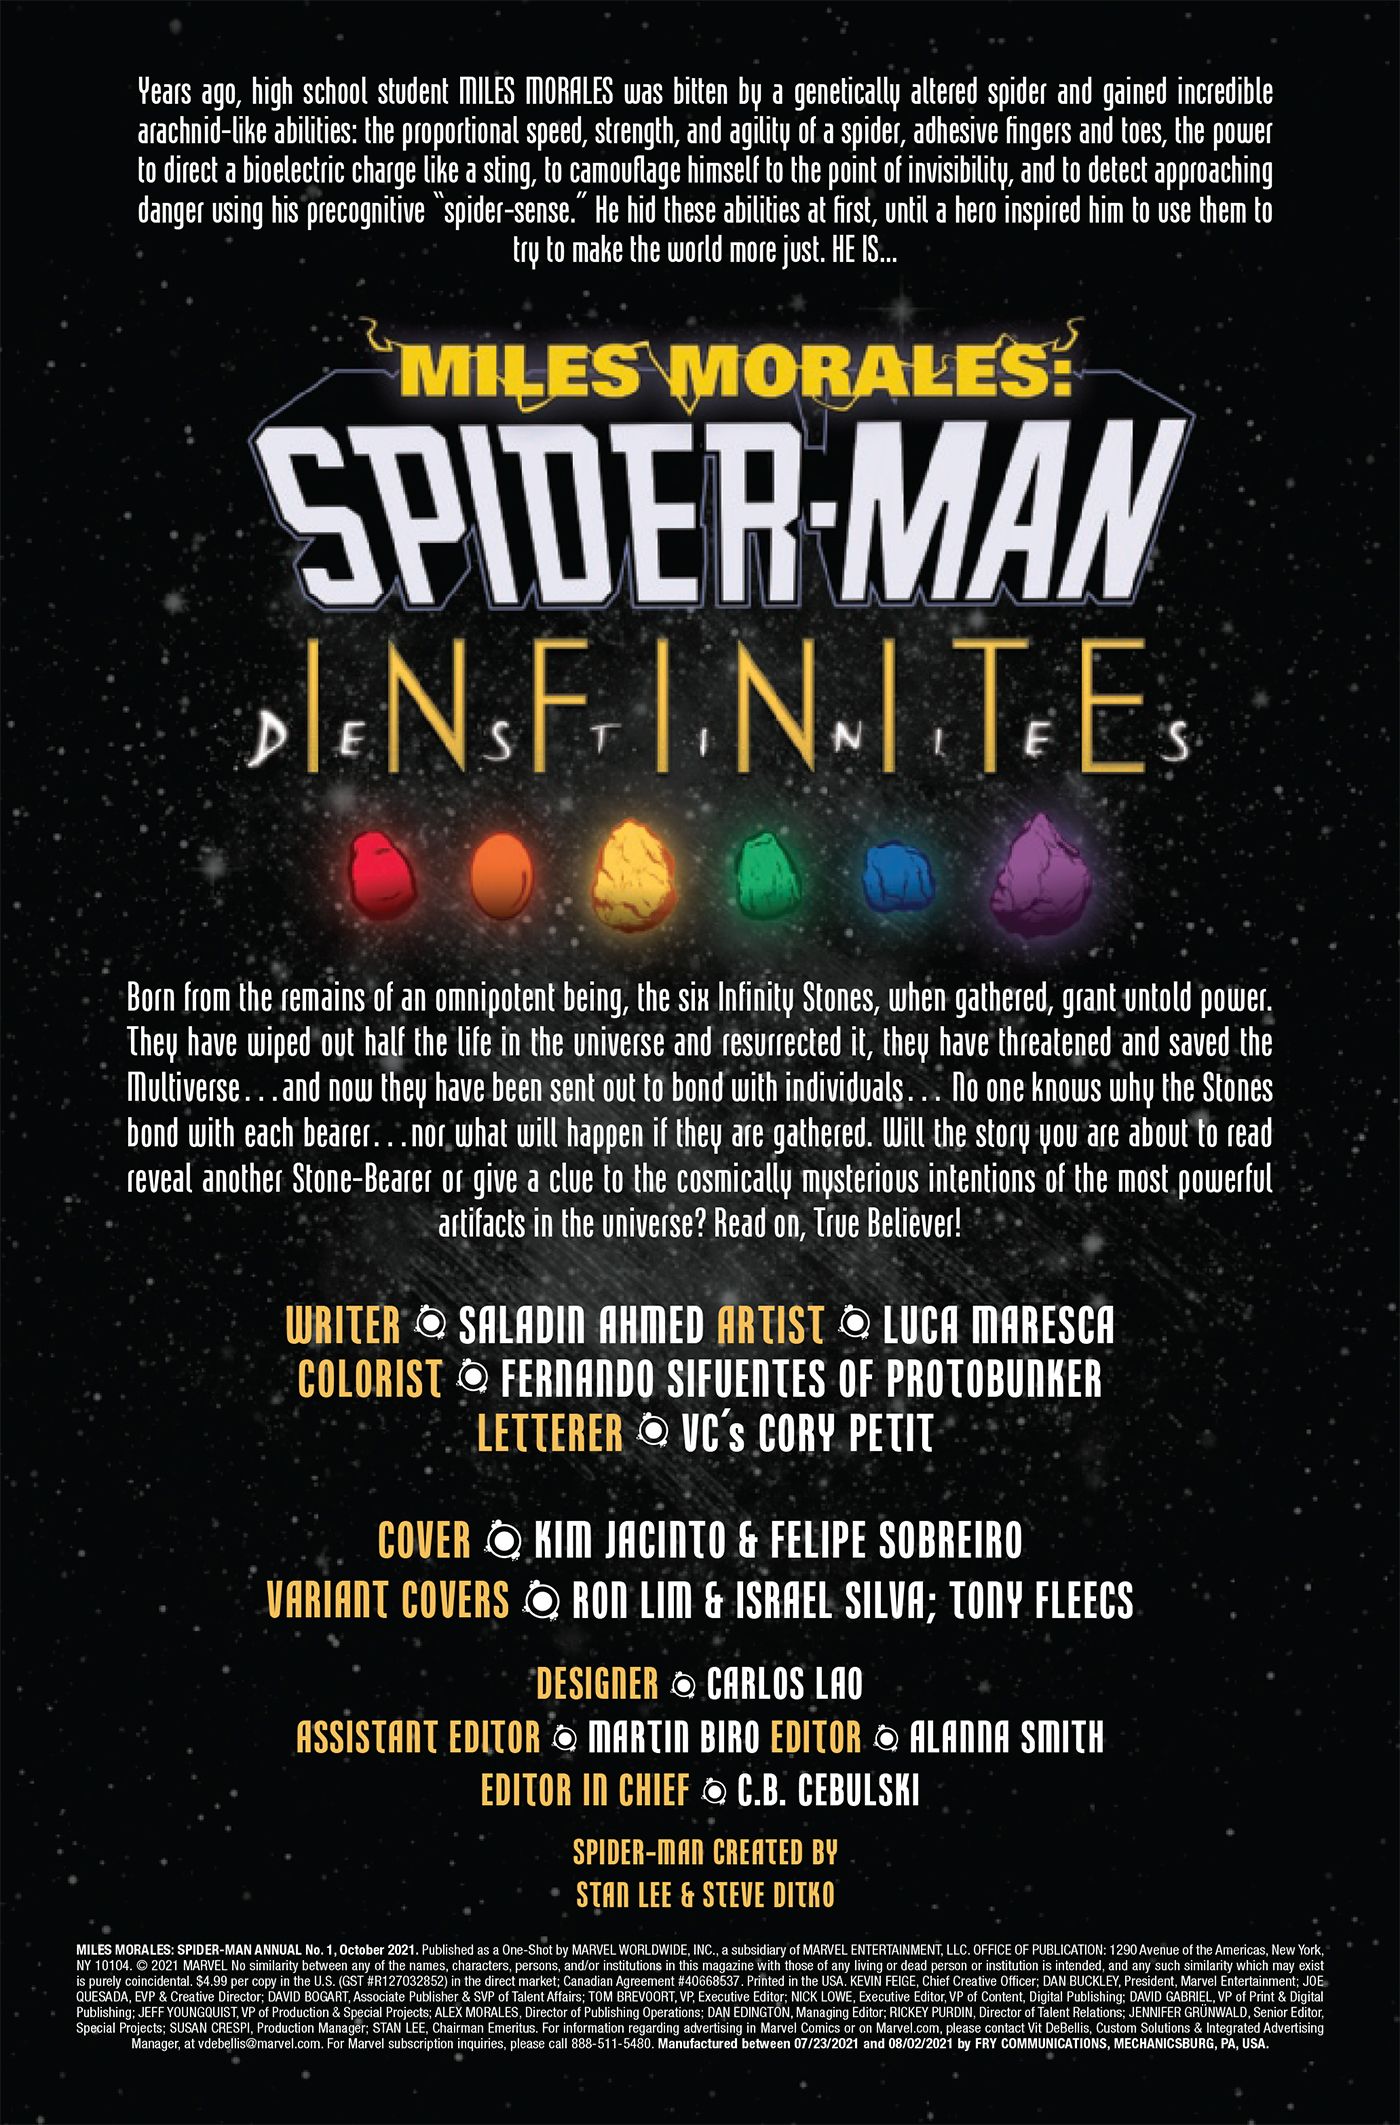 A recap of who Miles Morales and the stone bearers are in Infinite Destinies.